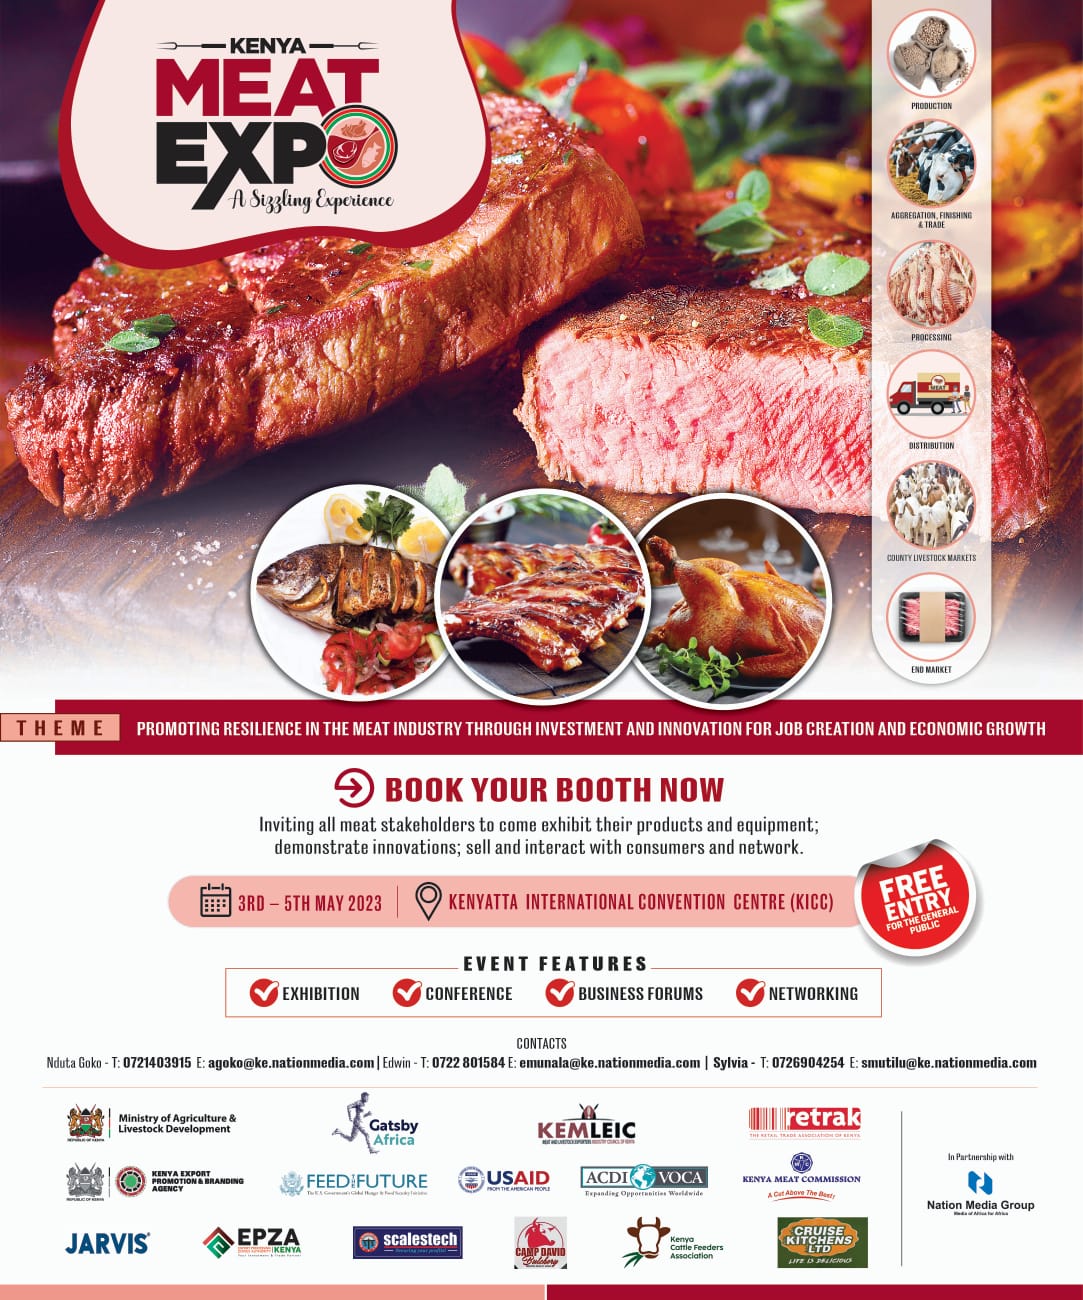 the Kenya Meat Expo